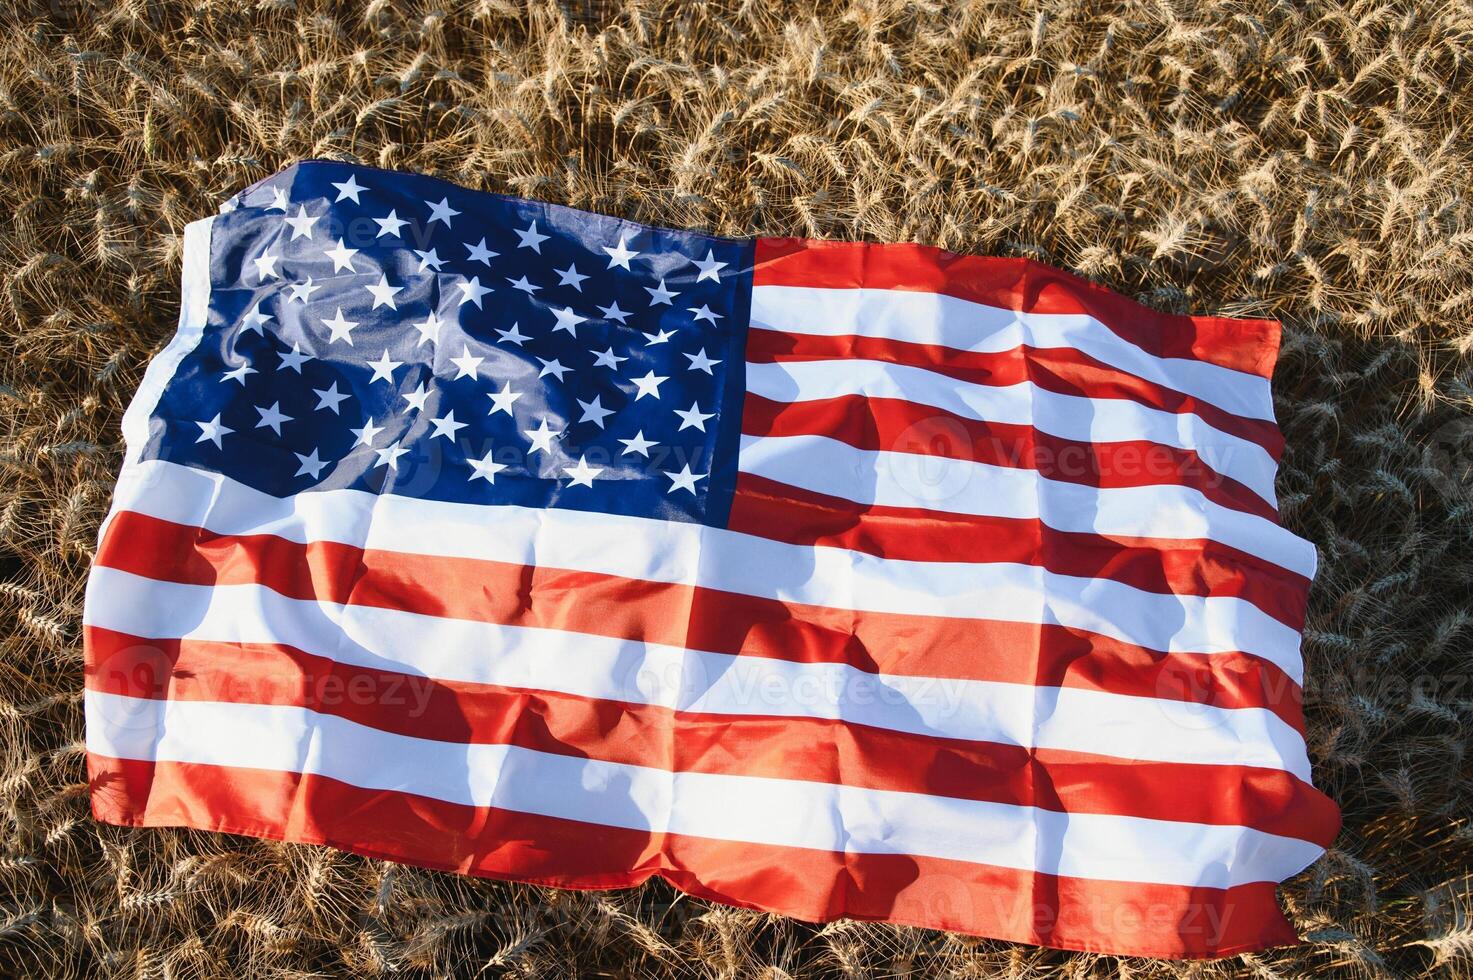 USA American flag spreaded on the golden wheat field. photo